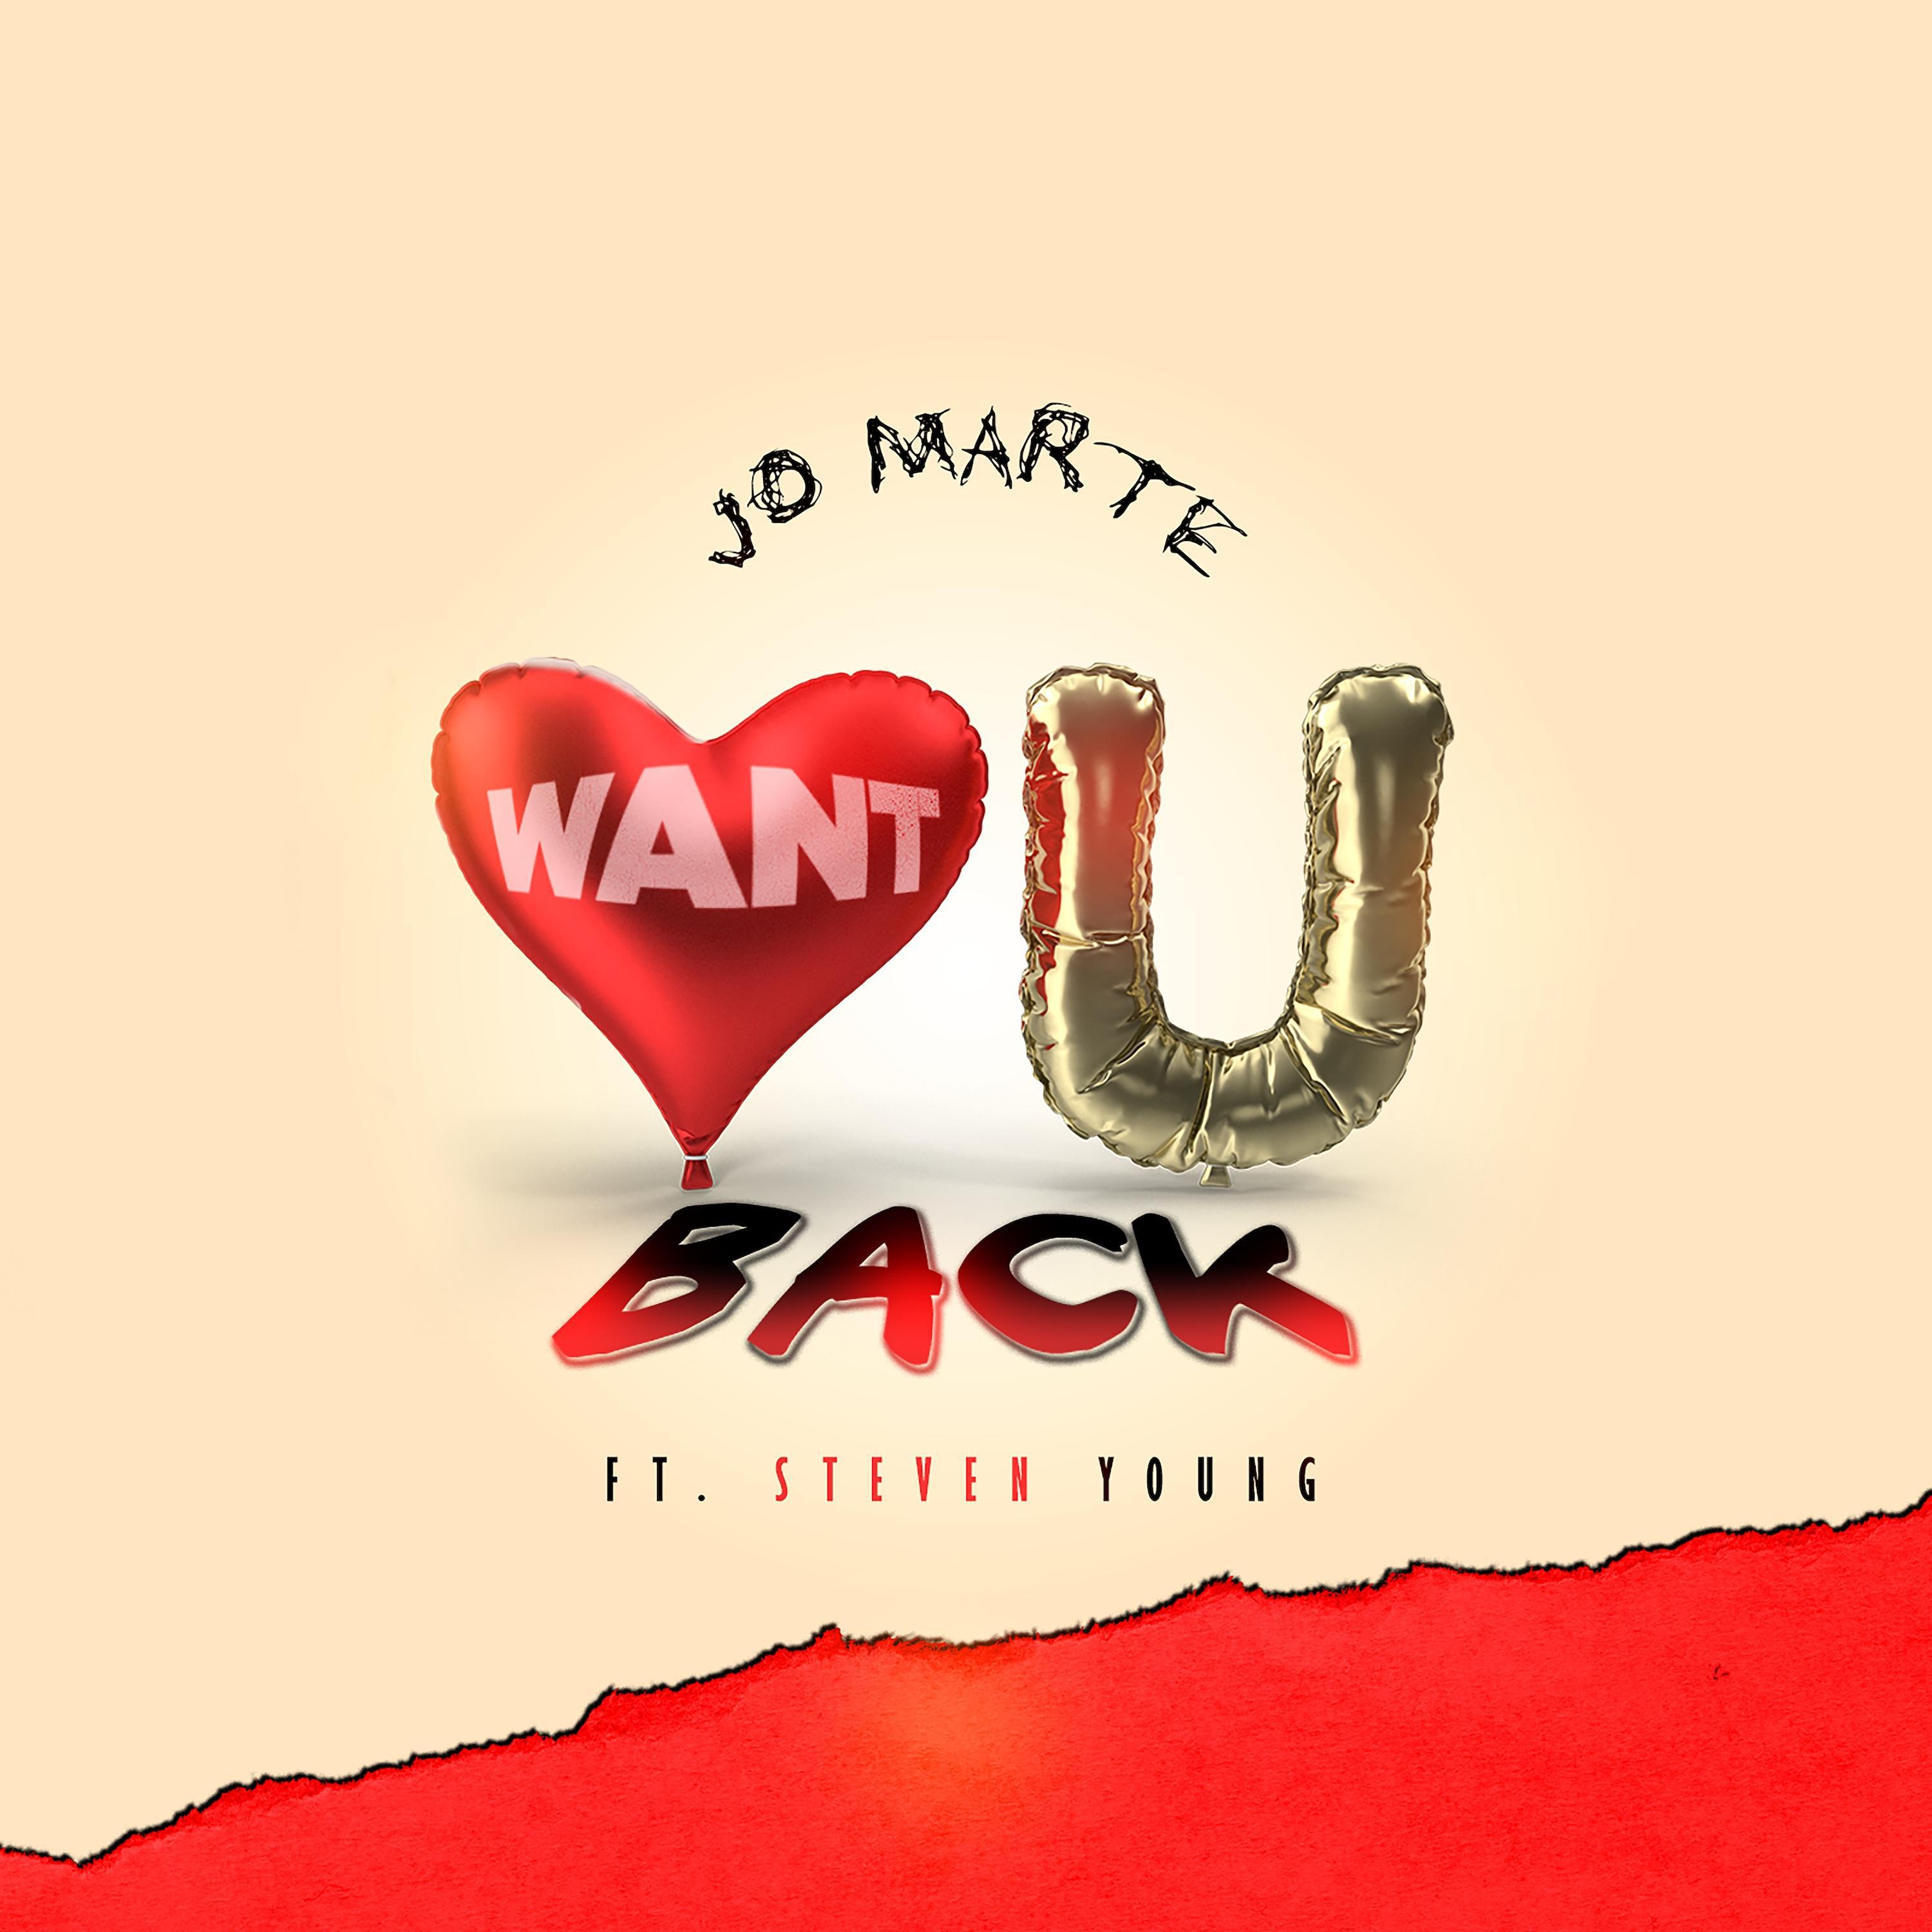 Jo Marte - Want You Back (feat. Steven Young)